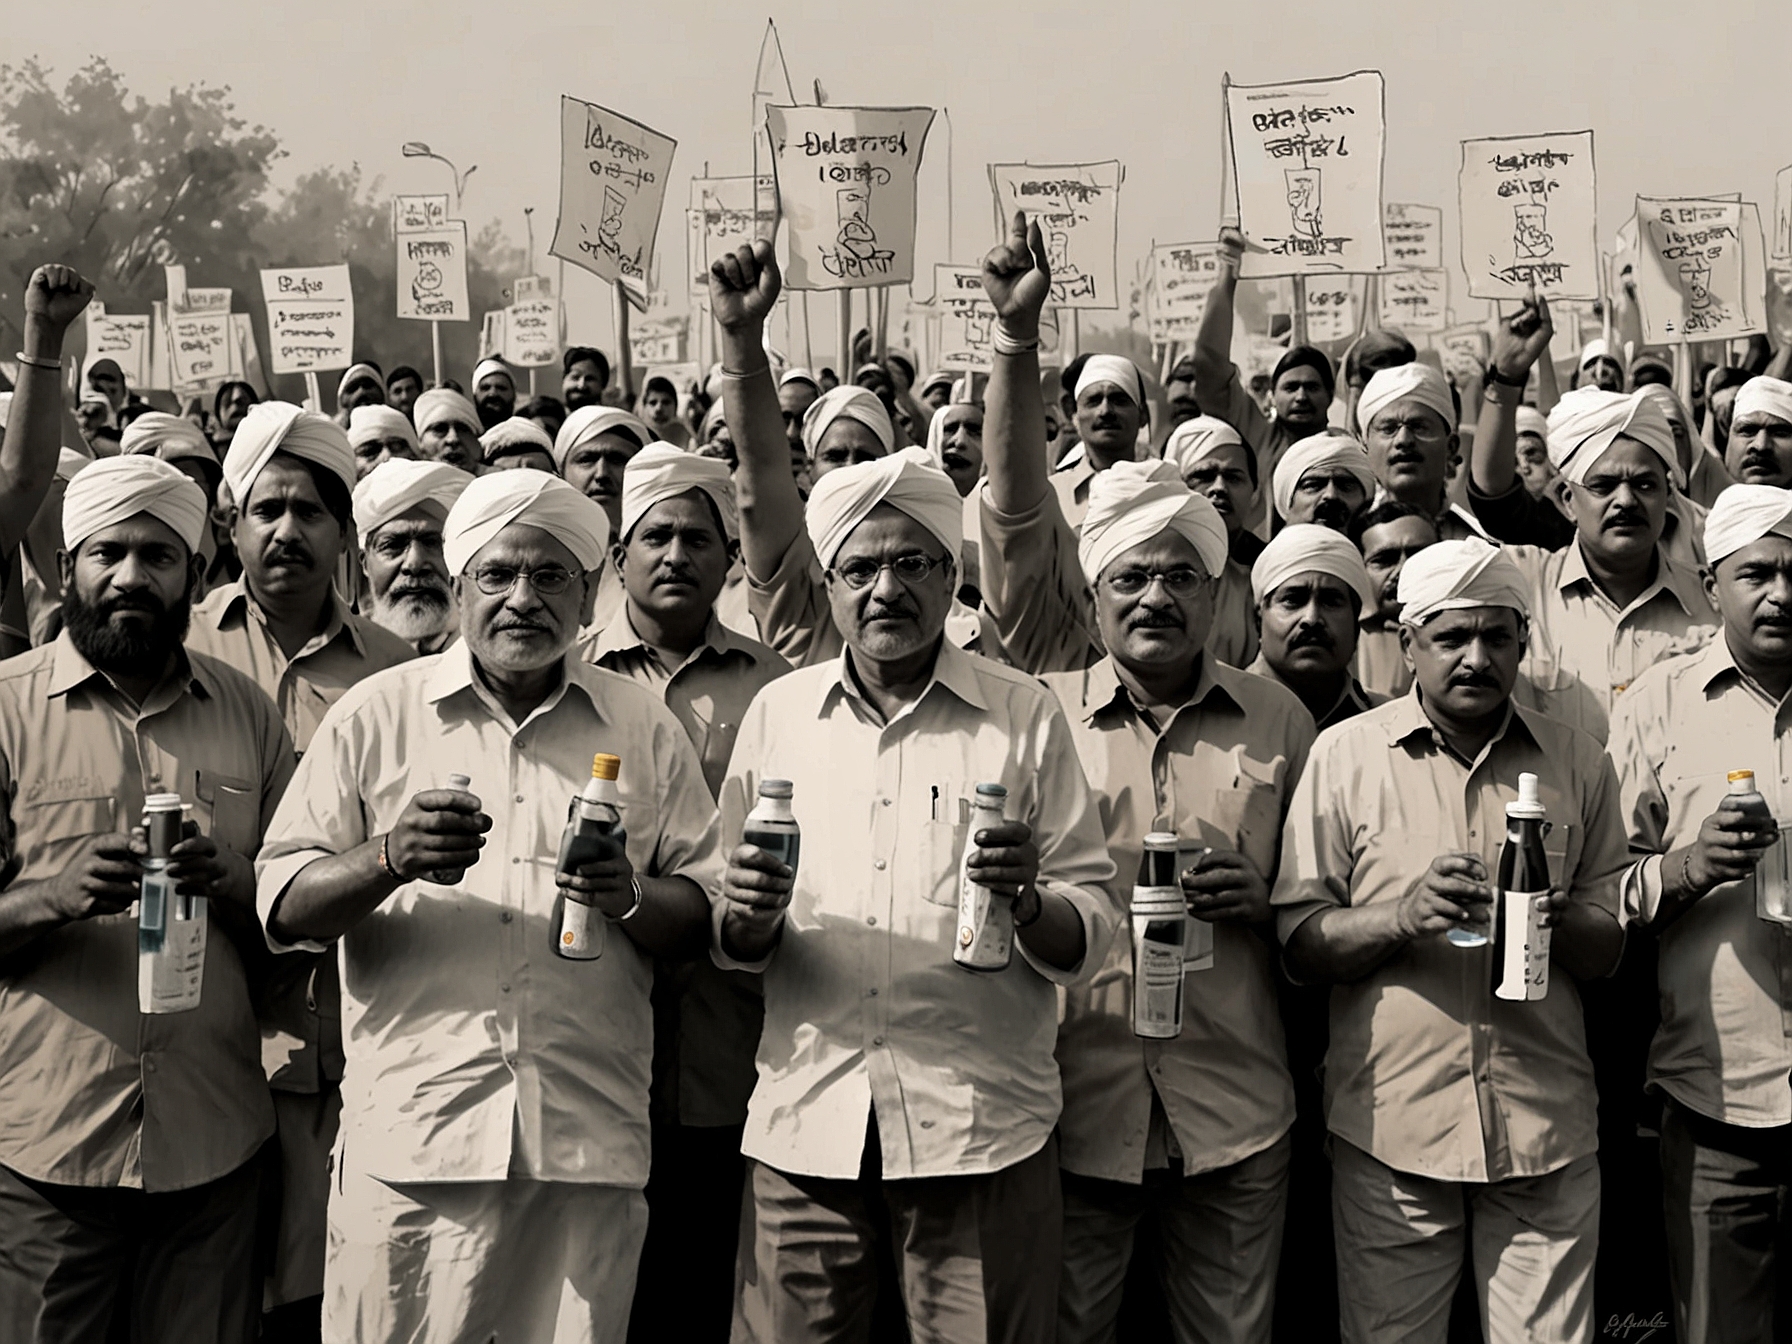 BJP leaders and supporters protest in Delhi holding bottles of murky water, demonstrating against the AAP government's handling of the water crisis and demanding clean, sufficient water for residents.